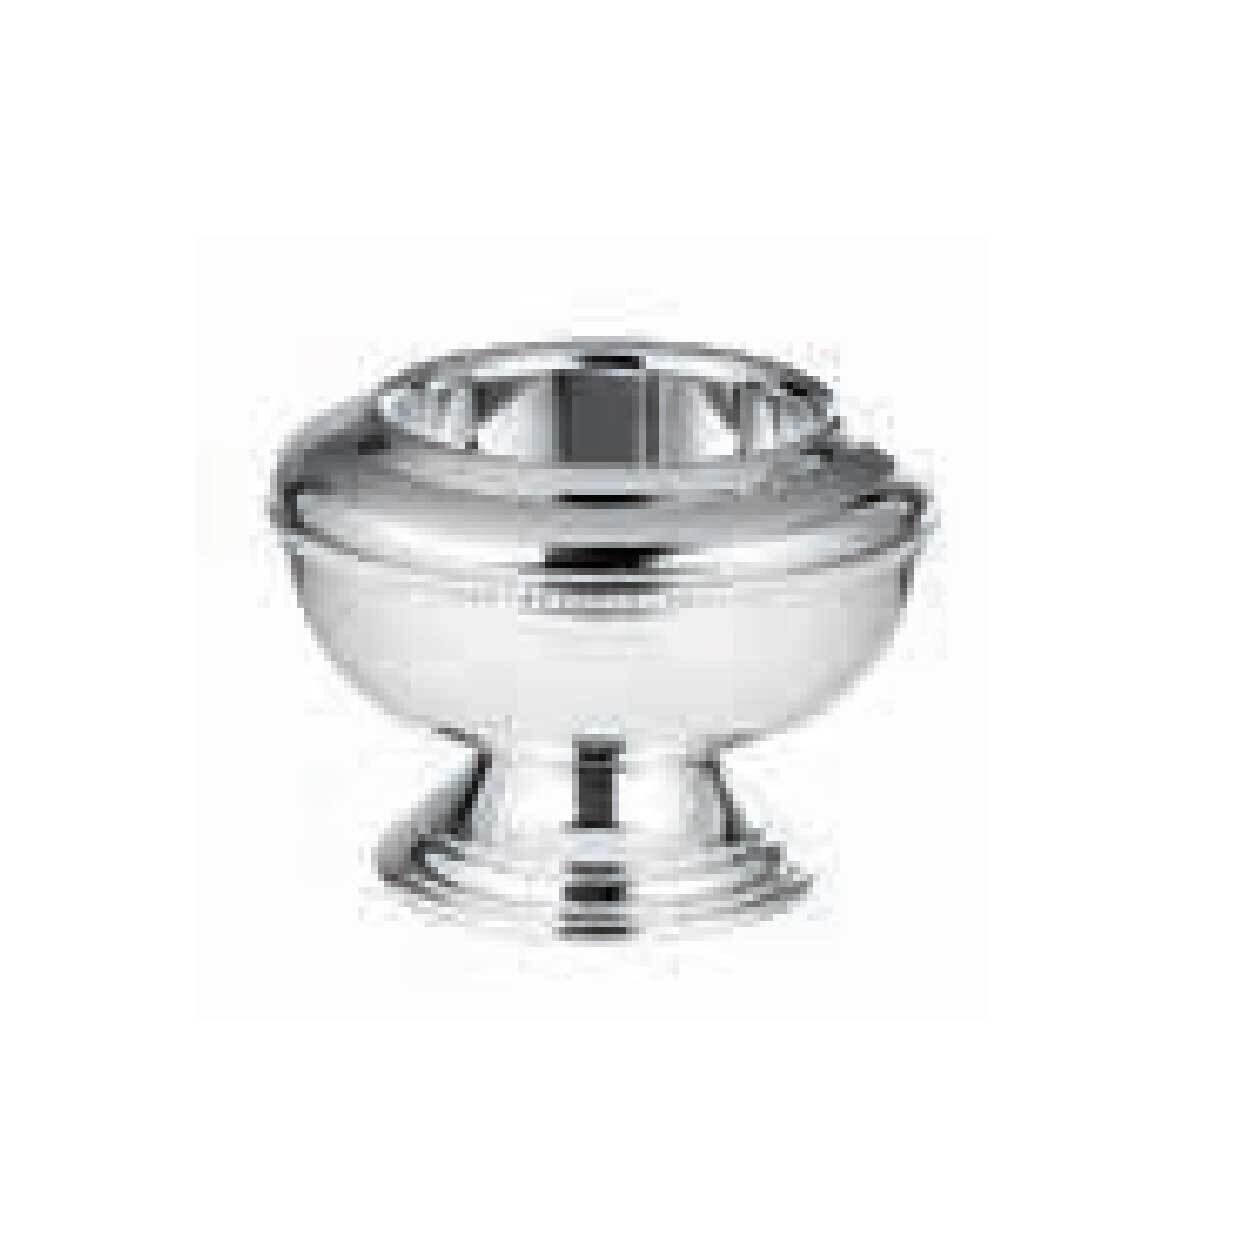 Ercuis Lauriers Supreme Caviar Prawns Cup 3.875 Inch Silver Plated F51L271-07